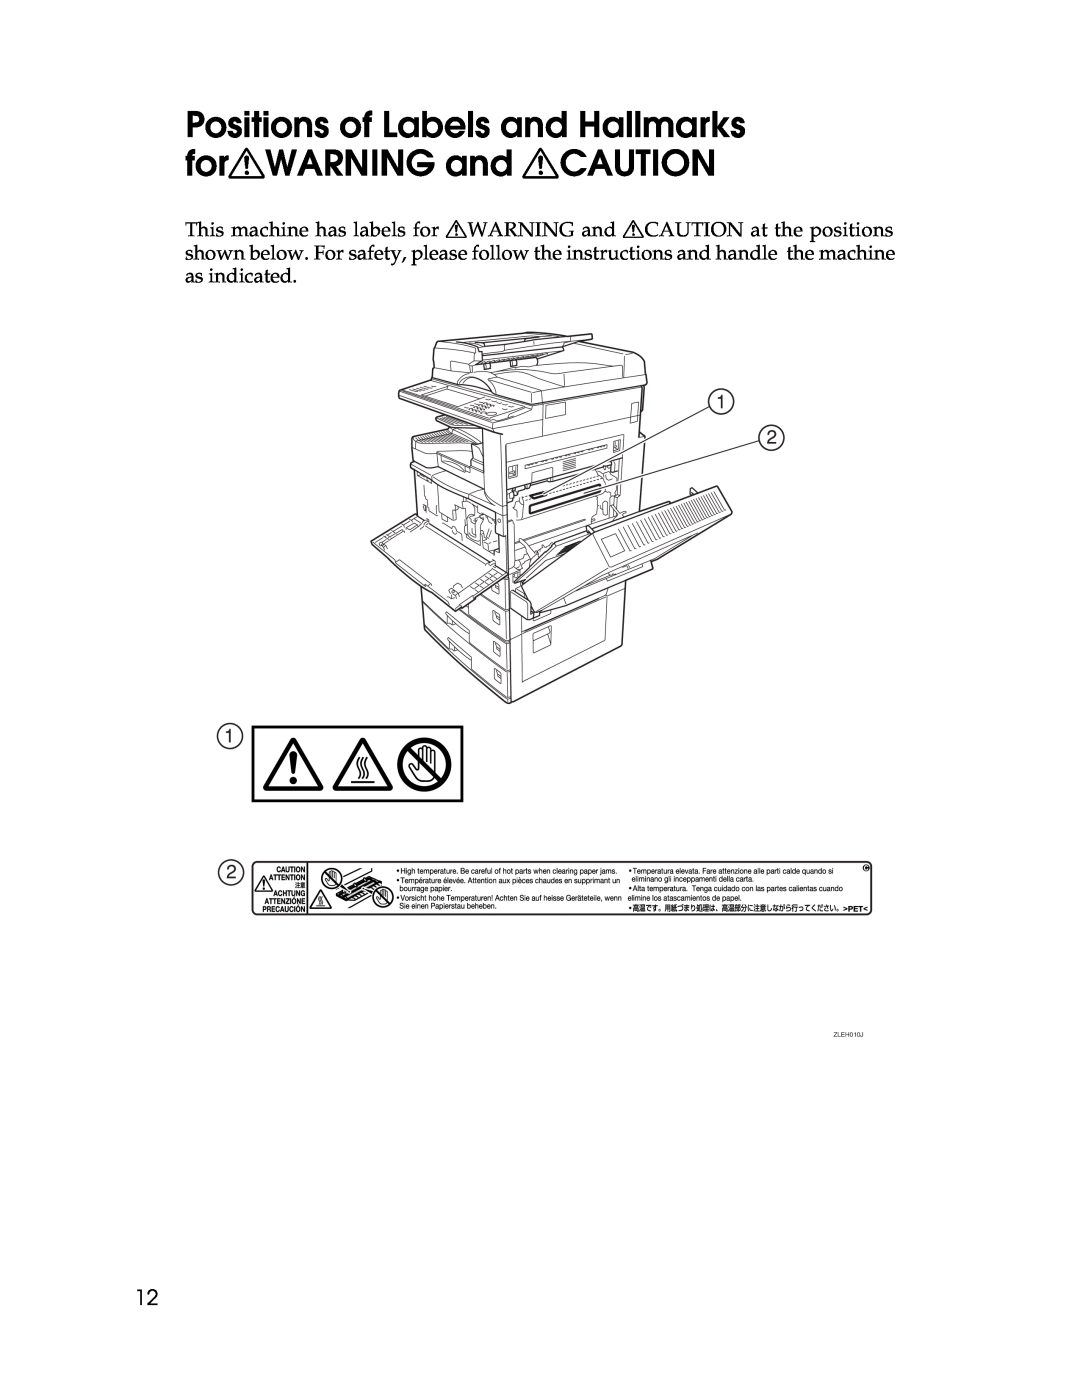 Lanier LD225, LD230 manual Positions of Labels and Hallmarks forRWARNING and RCAUTION, ZLEH010J 